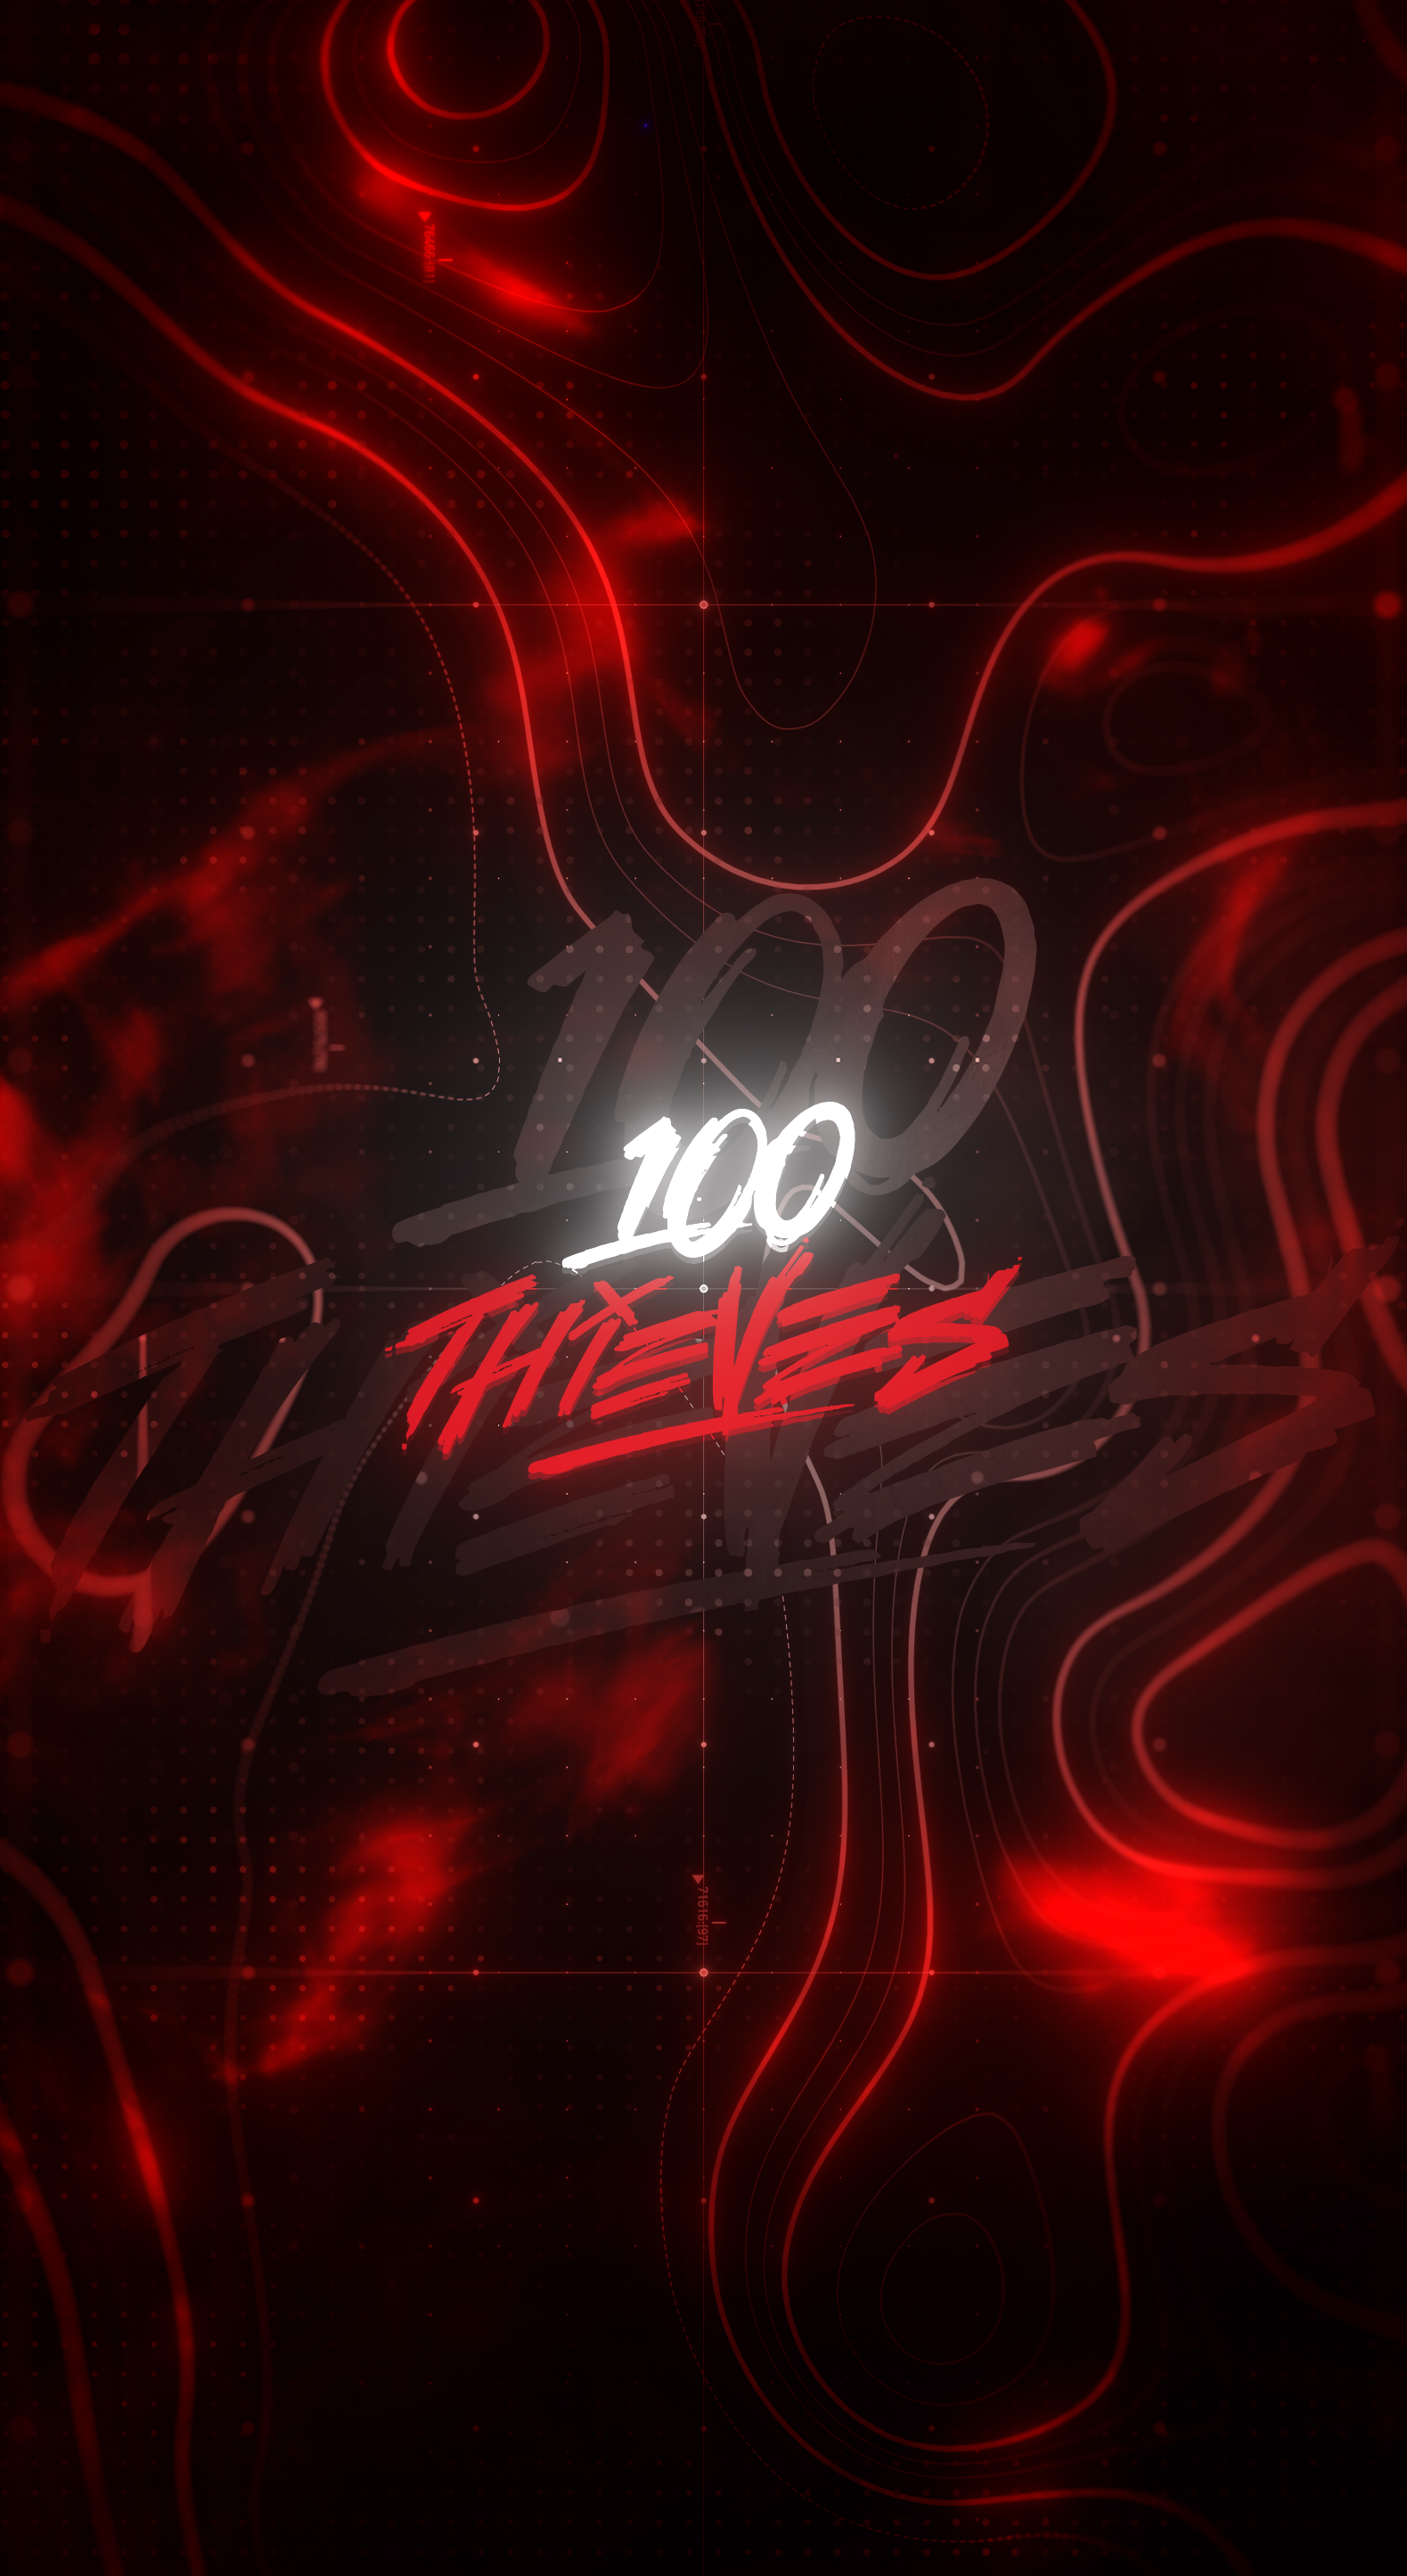 Here Is The Phone Wallpaper, Please Let Me Know Your - 100 Thieves Wallpaper Iphone , HD Wallpaper & Backgrounds